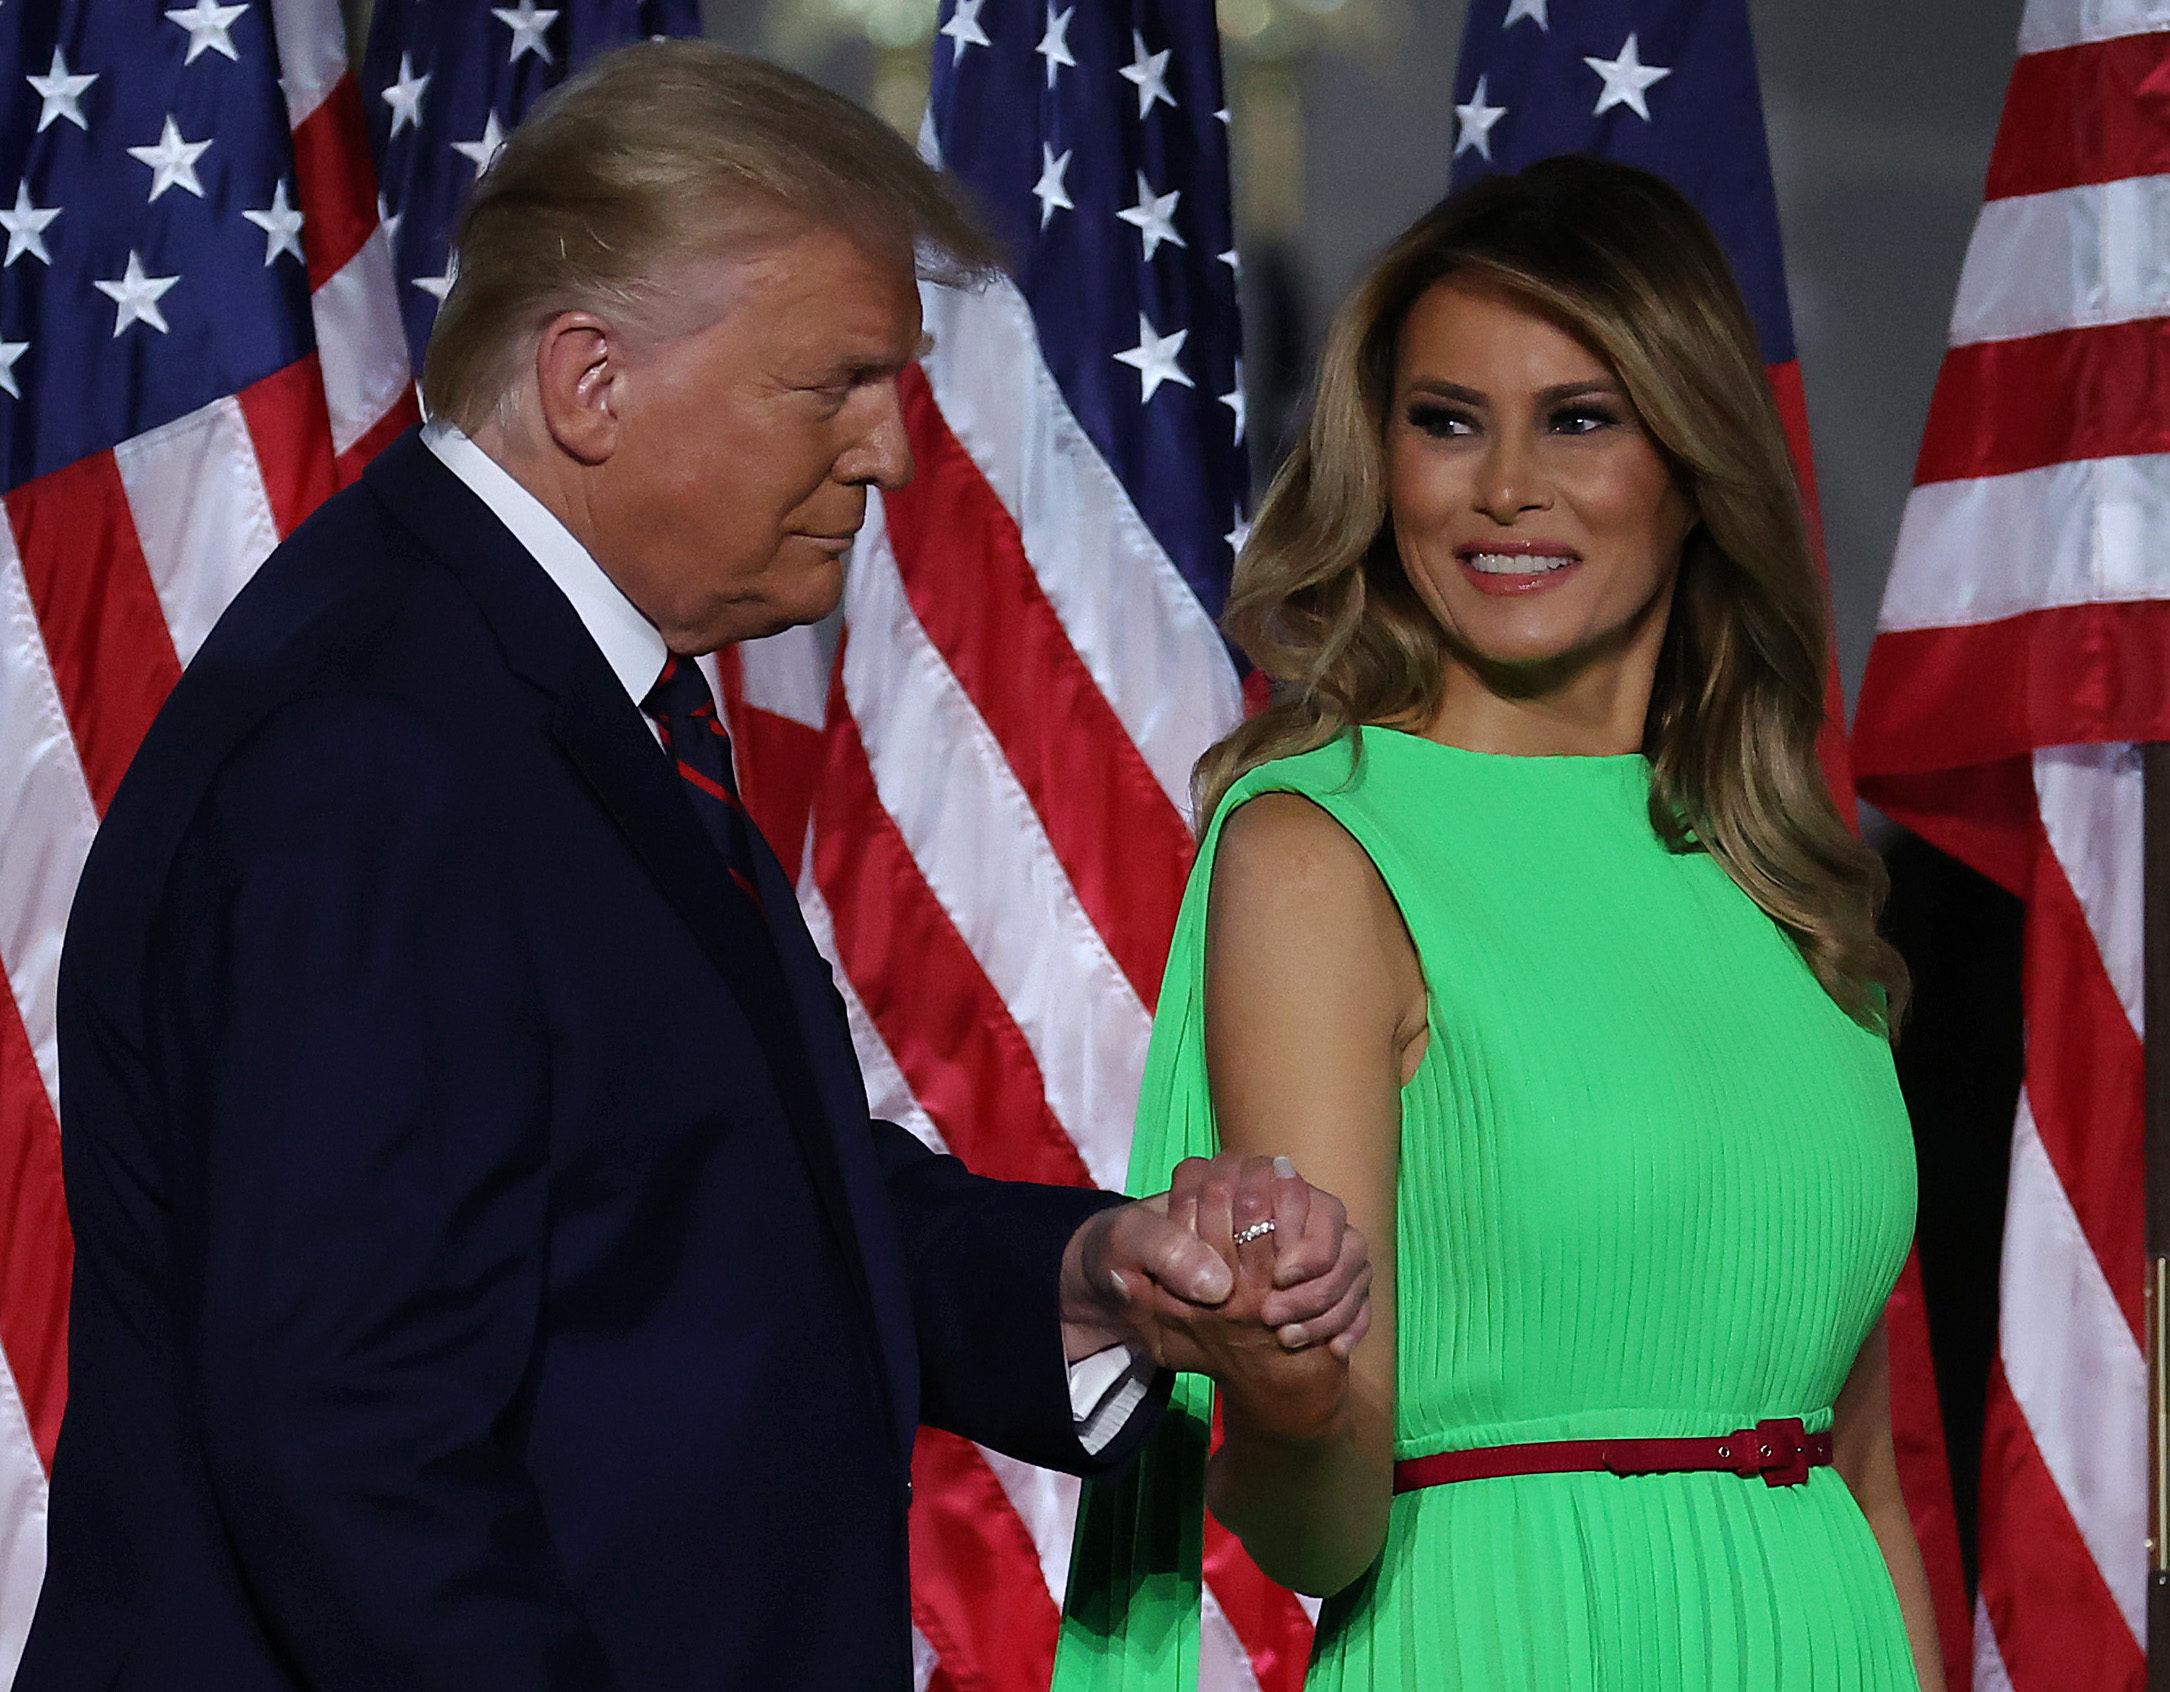 WASHINGTON, DC - AUGUST 27: U.S. President Donald Trump leads first lady Melania Trump off the podium as he prepares to deliver his acceptance speech for the Republican presidential nomination on the South Lawn of the White House August 27, 2020 in Washington, DC. (Photo by Chip Somodevilla/Getty Images)